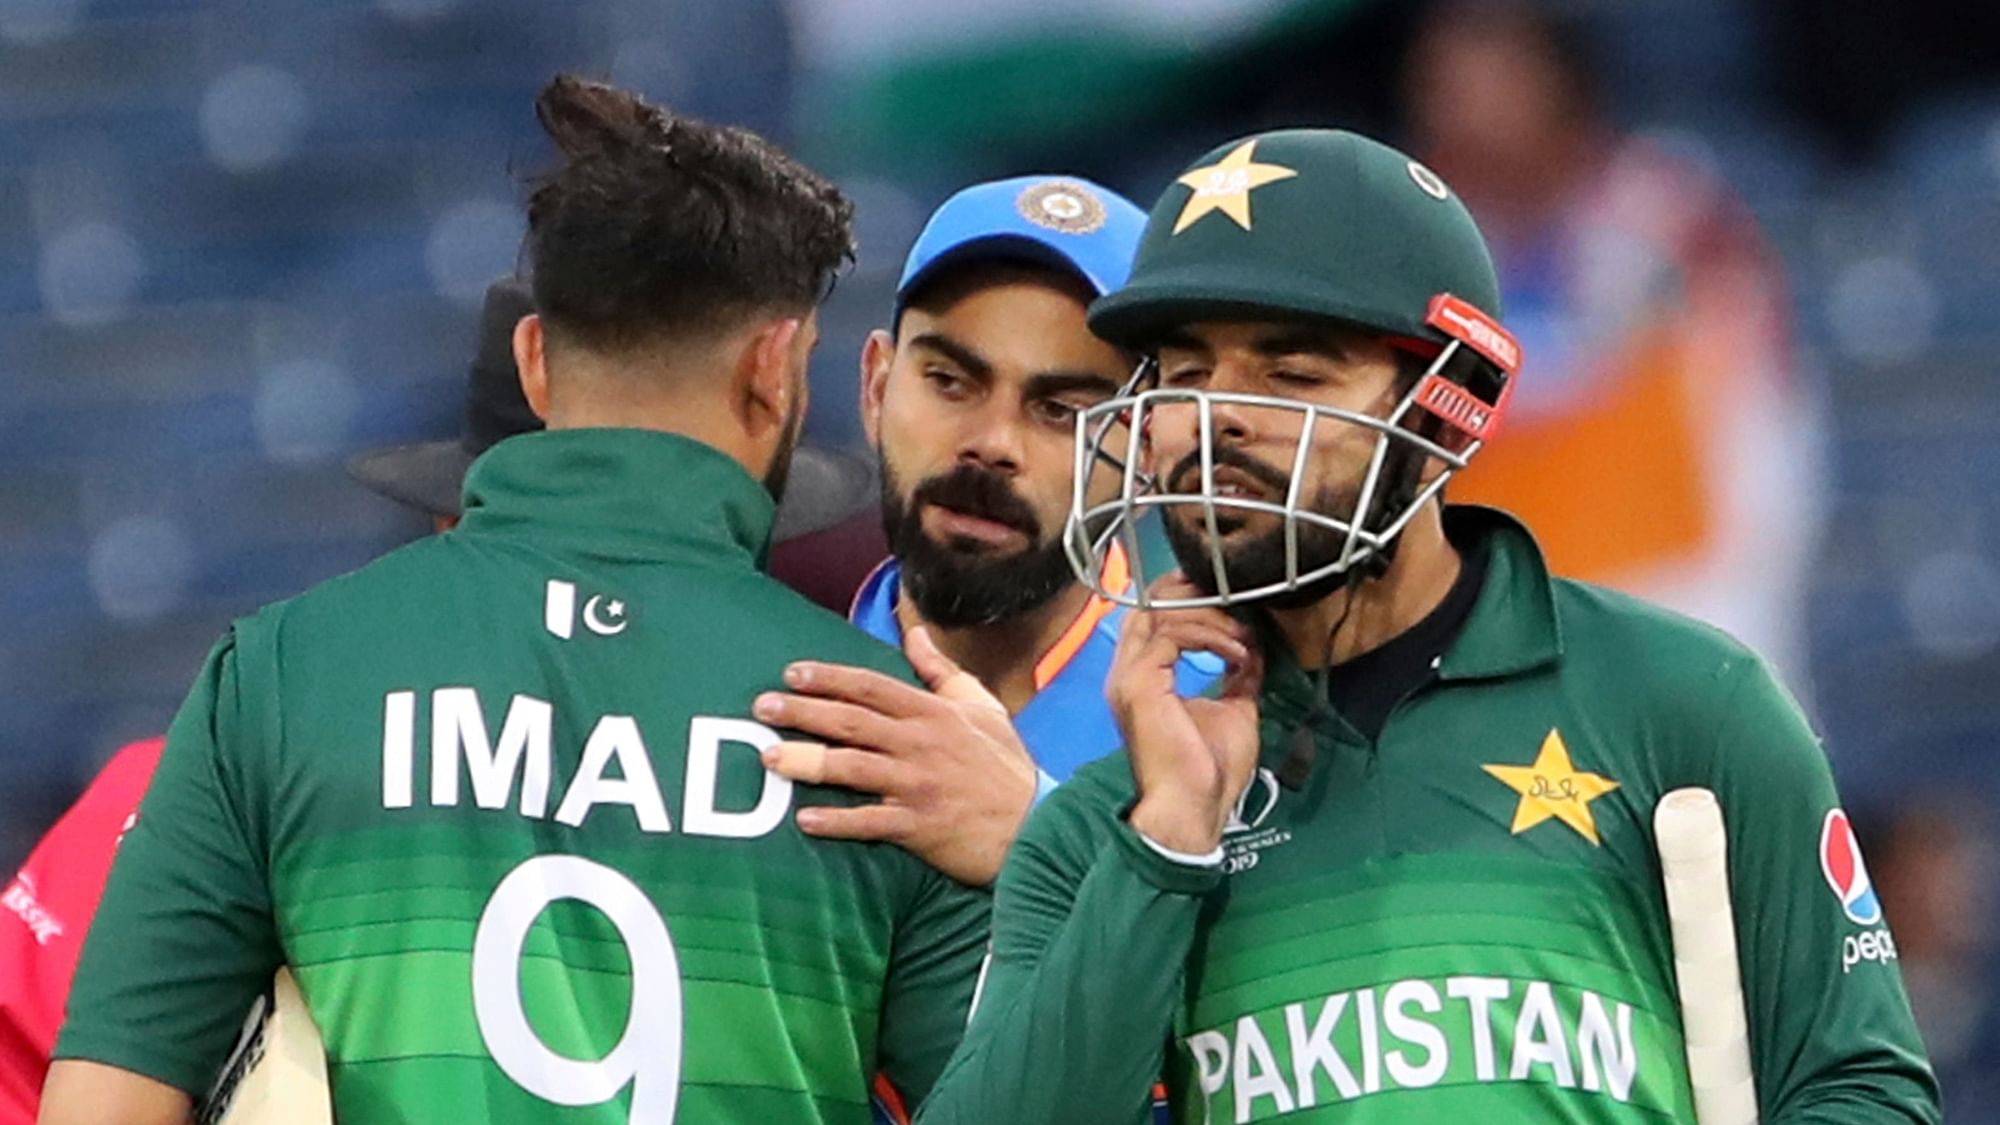 India had defeated Pakistan by 89 runs in the 2019 ICC World Cup.